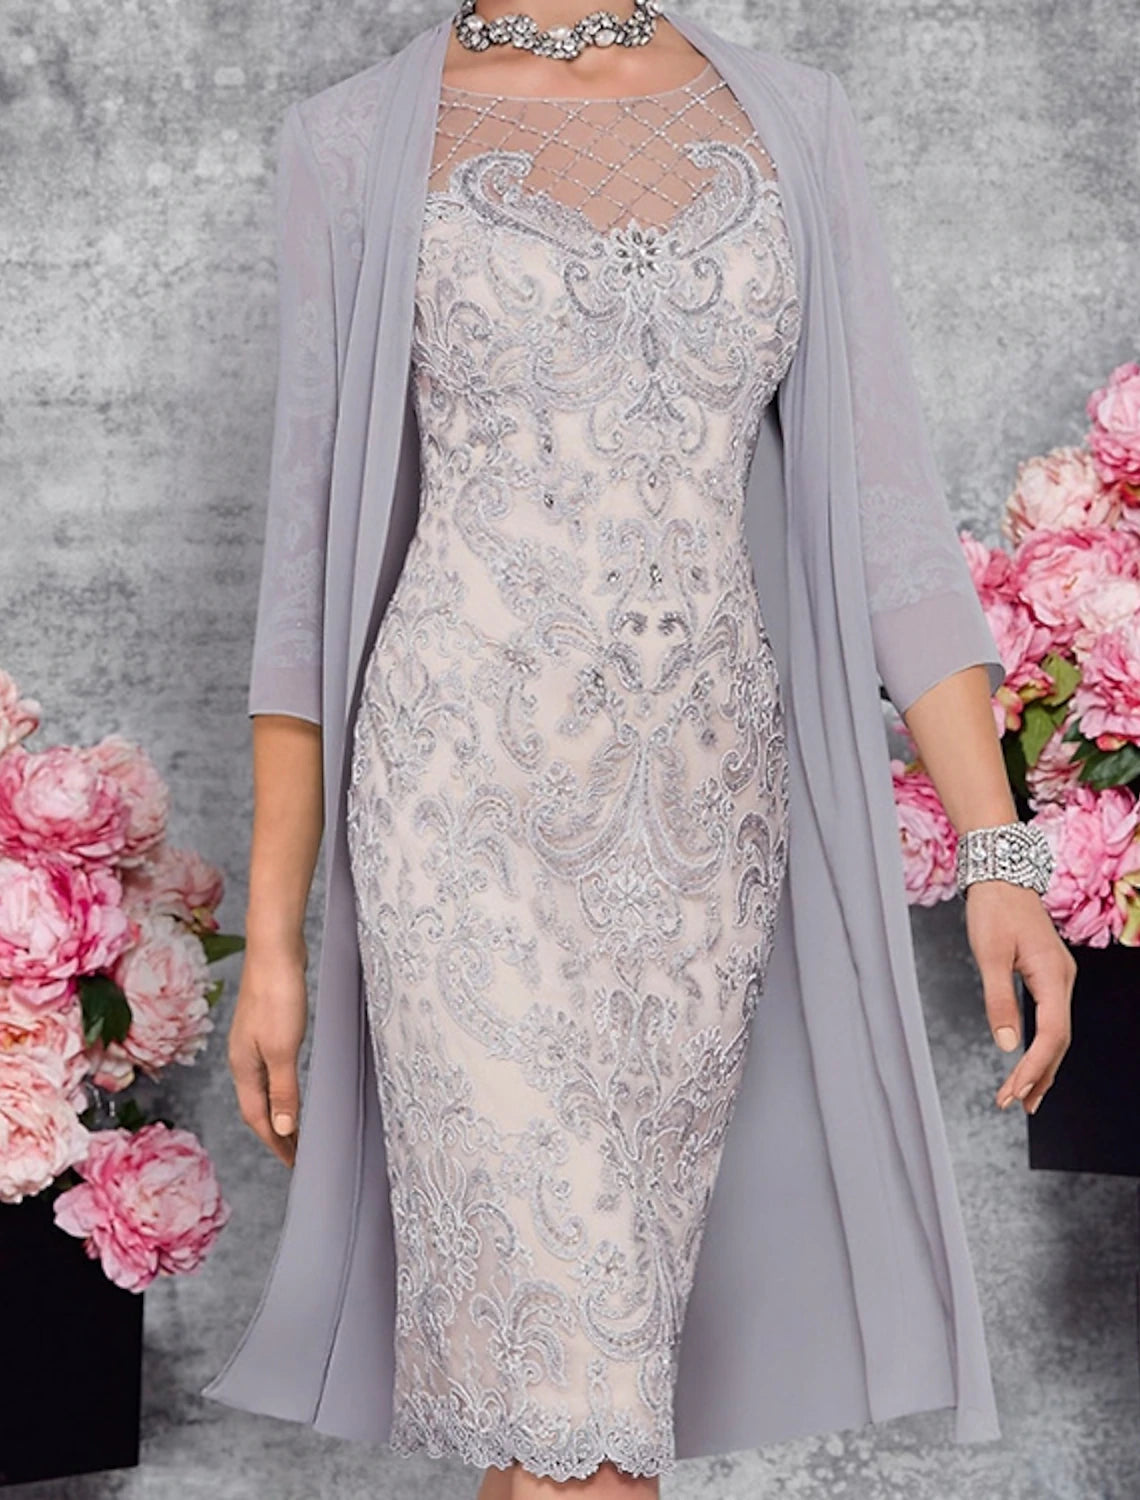 Two Piece Sheath / Column Mother of the Bride Dress Fall Wedding Guest Dresses Church Elegant Illusion Neck Knee Length Lace 3/4 Length Sleeve Jacket Dresses with Embroidery